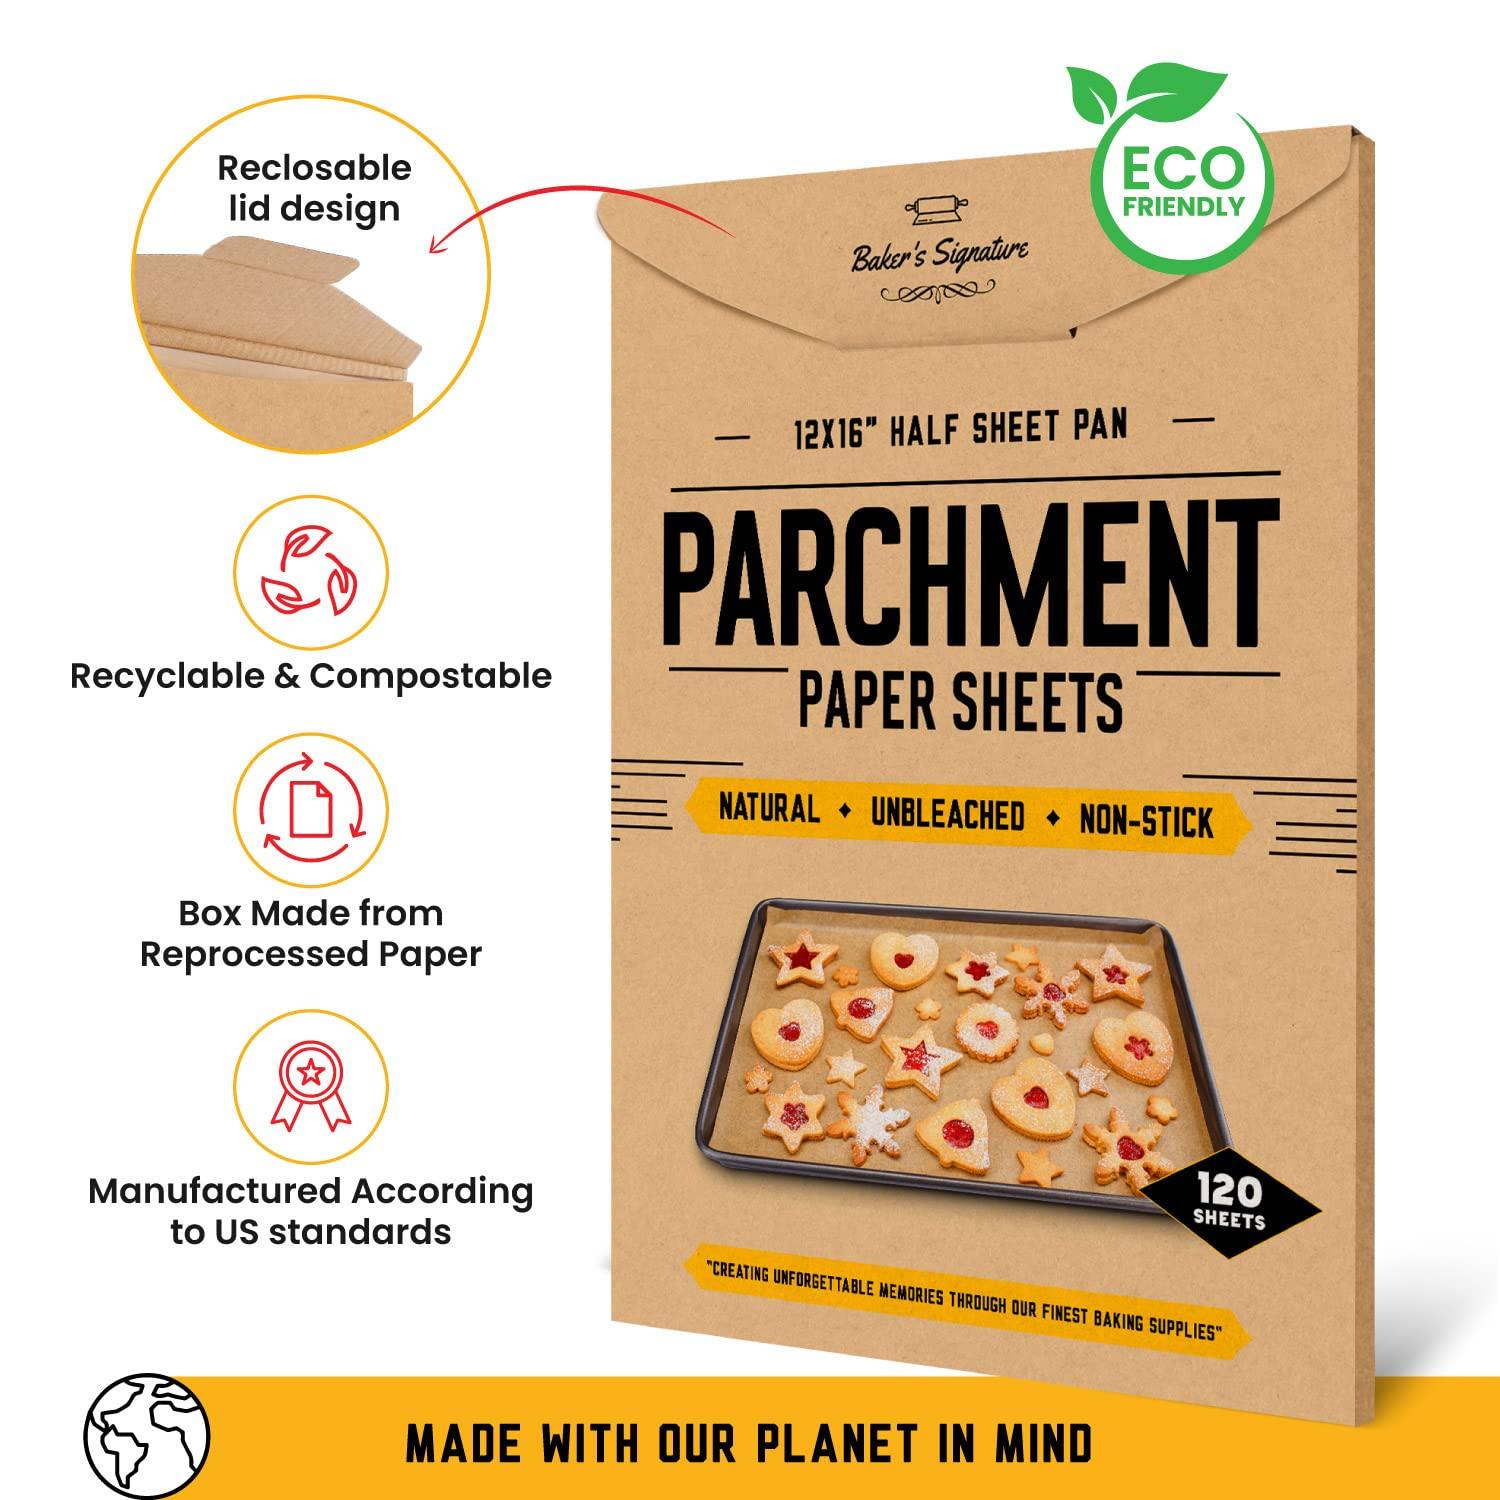 Parchment Paper Baking Sheets by Baker's Signature | Precut Non-Stick & Unbleached - Will Not Curl or Burn - Non-Toxic & Comes in Convenient Packaging - 12x16 Inch Pack of 120 - CookCave